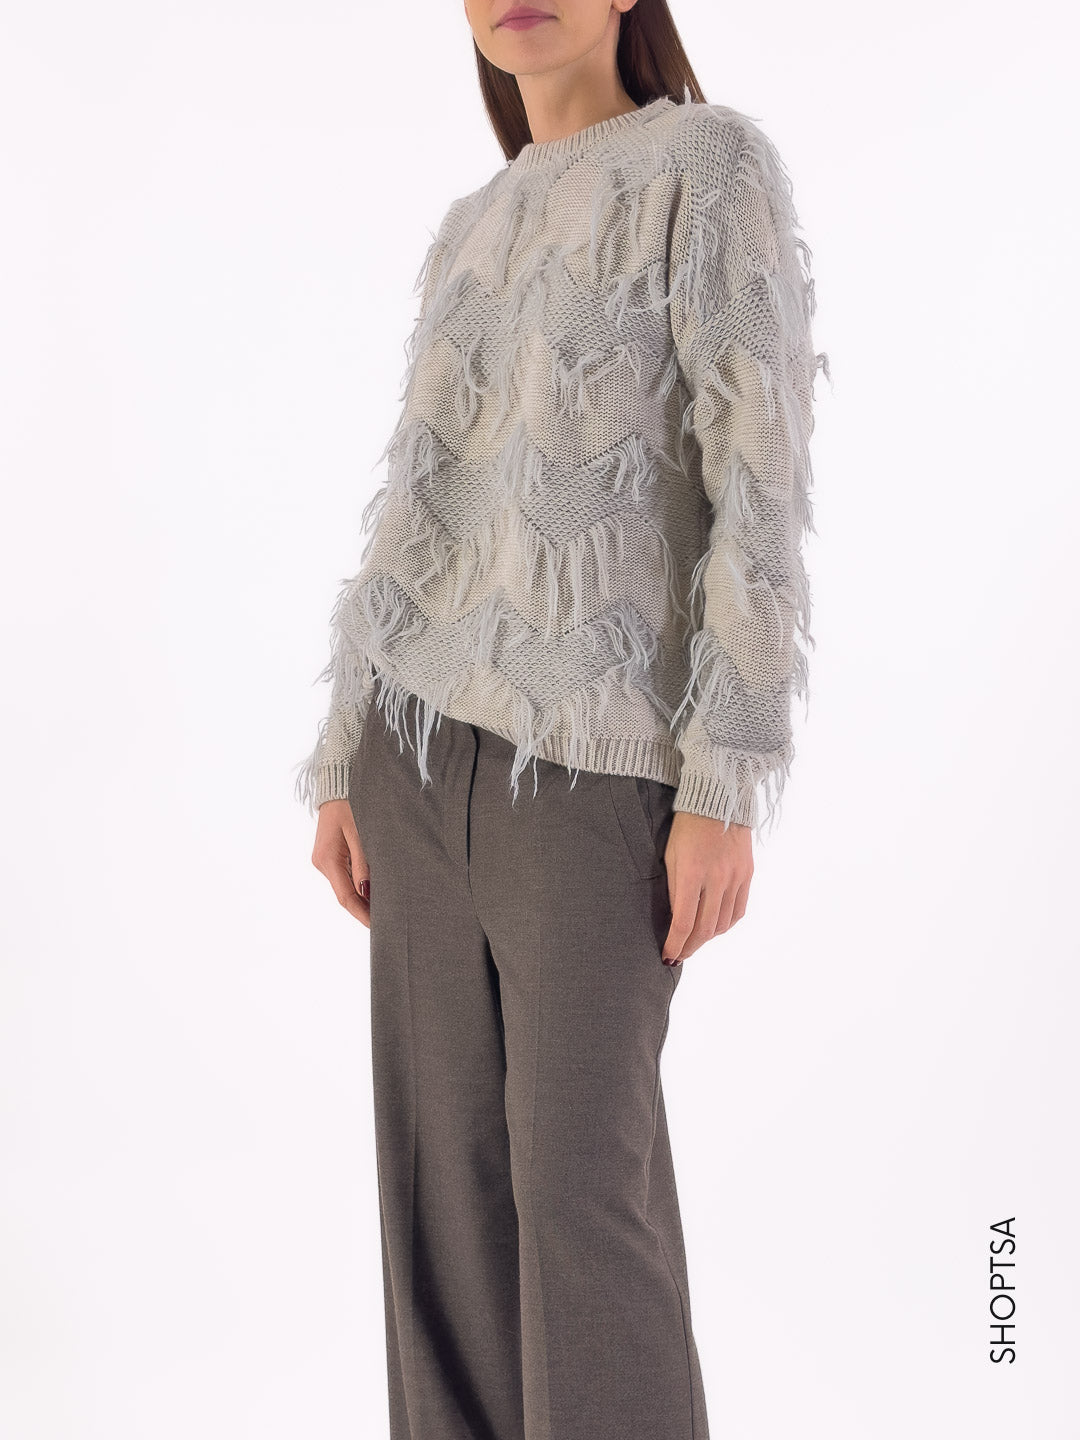 Wool sweater with applications 55111r - ViCOLO